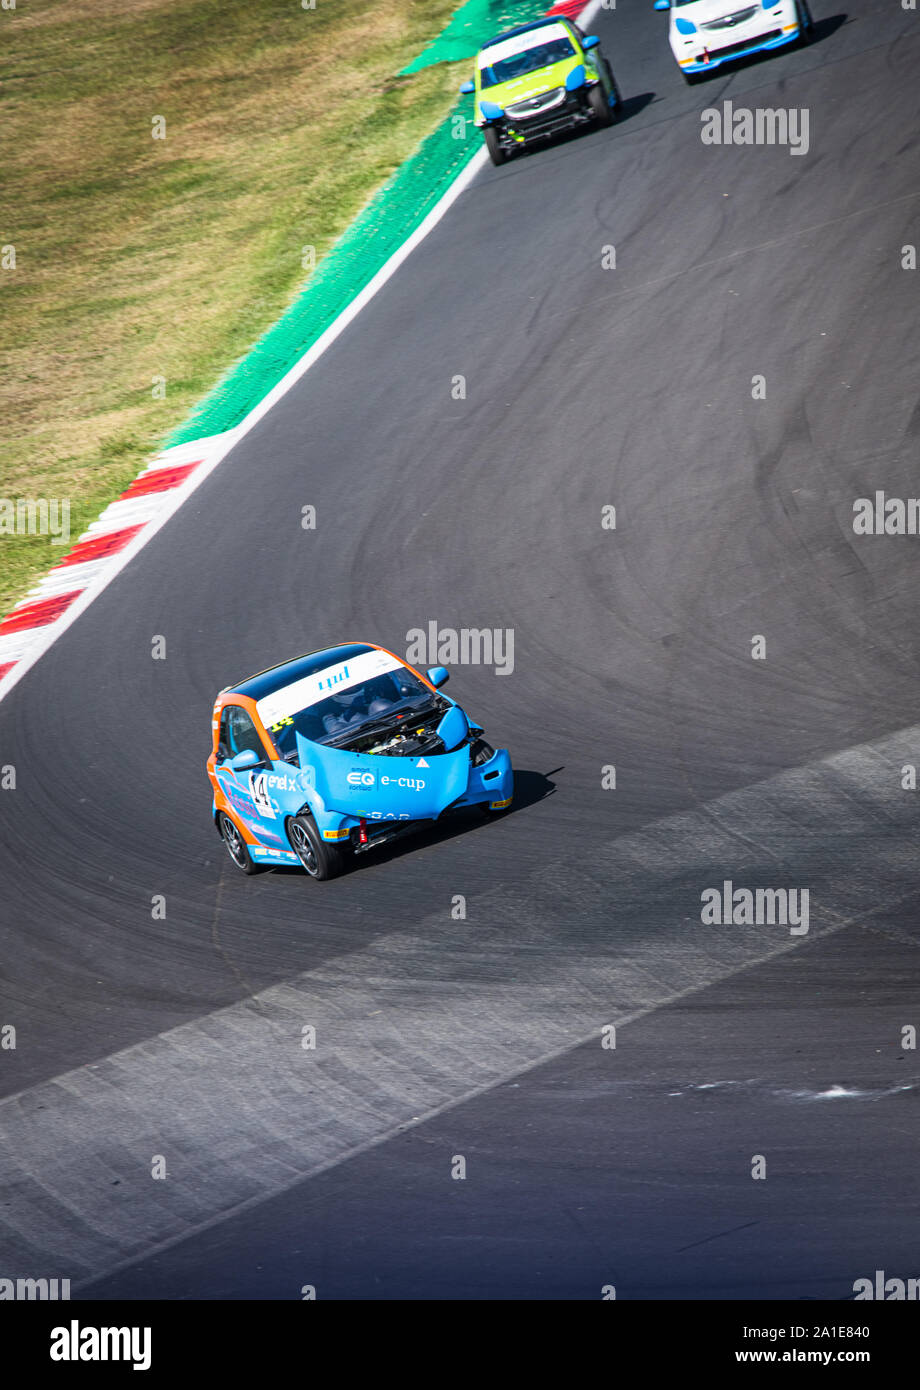 Vallelunga, Italy september 14 2019. High angle view of asphalt circuit with Smart electric engine racing car in action during the race, crashed damag Stock Photo